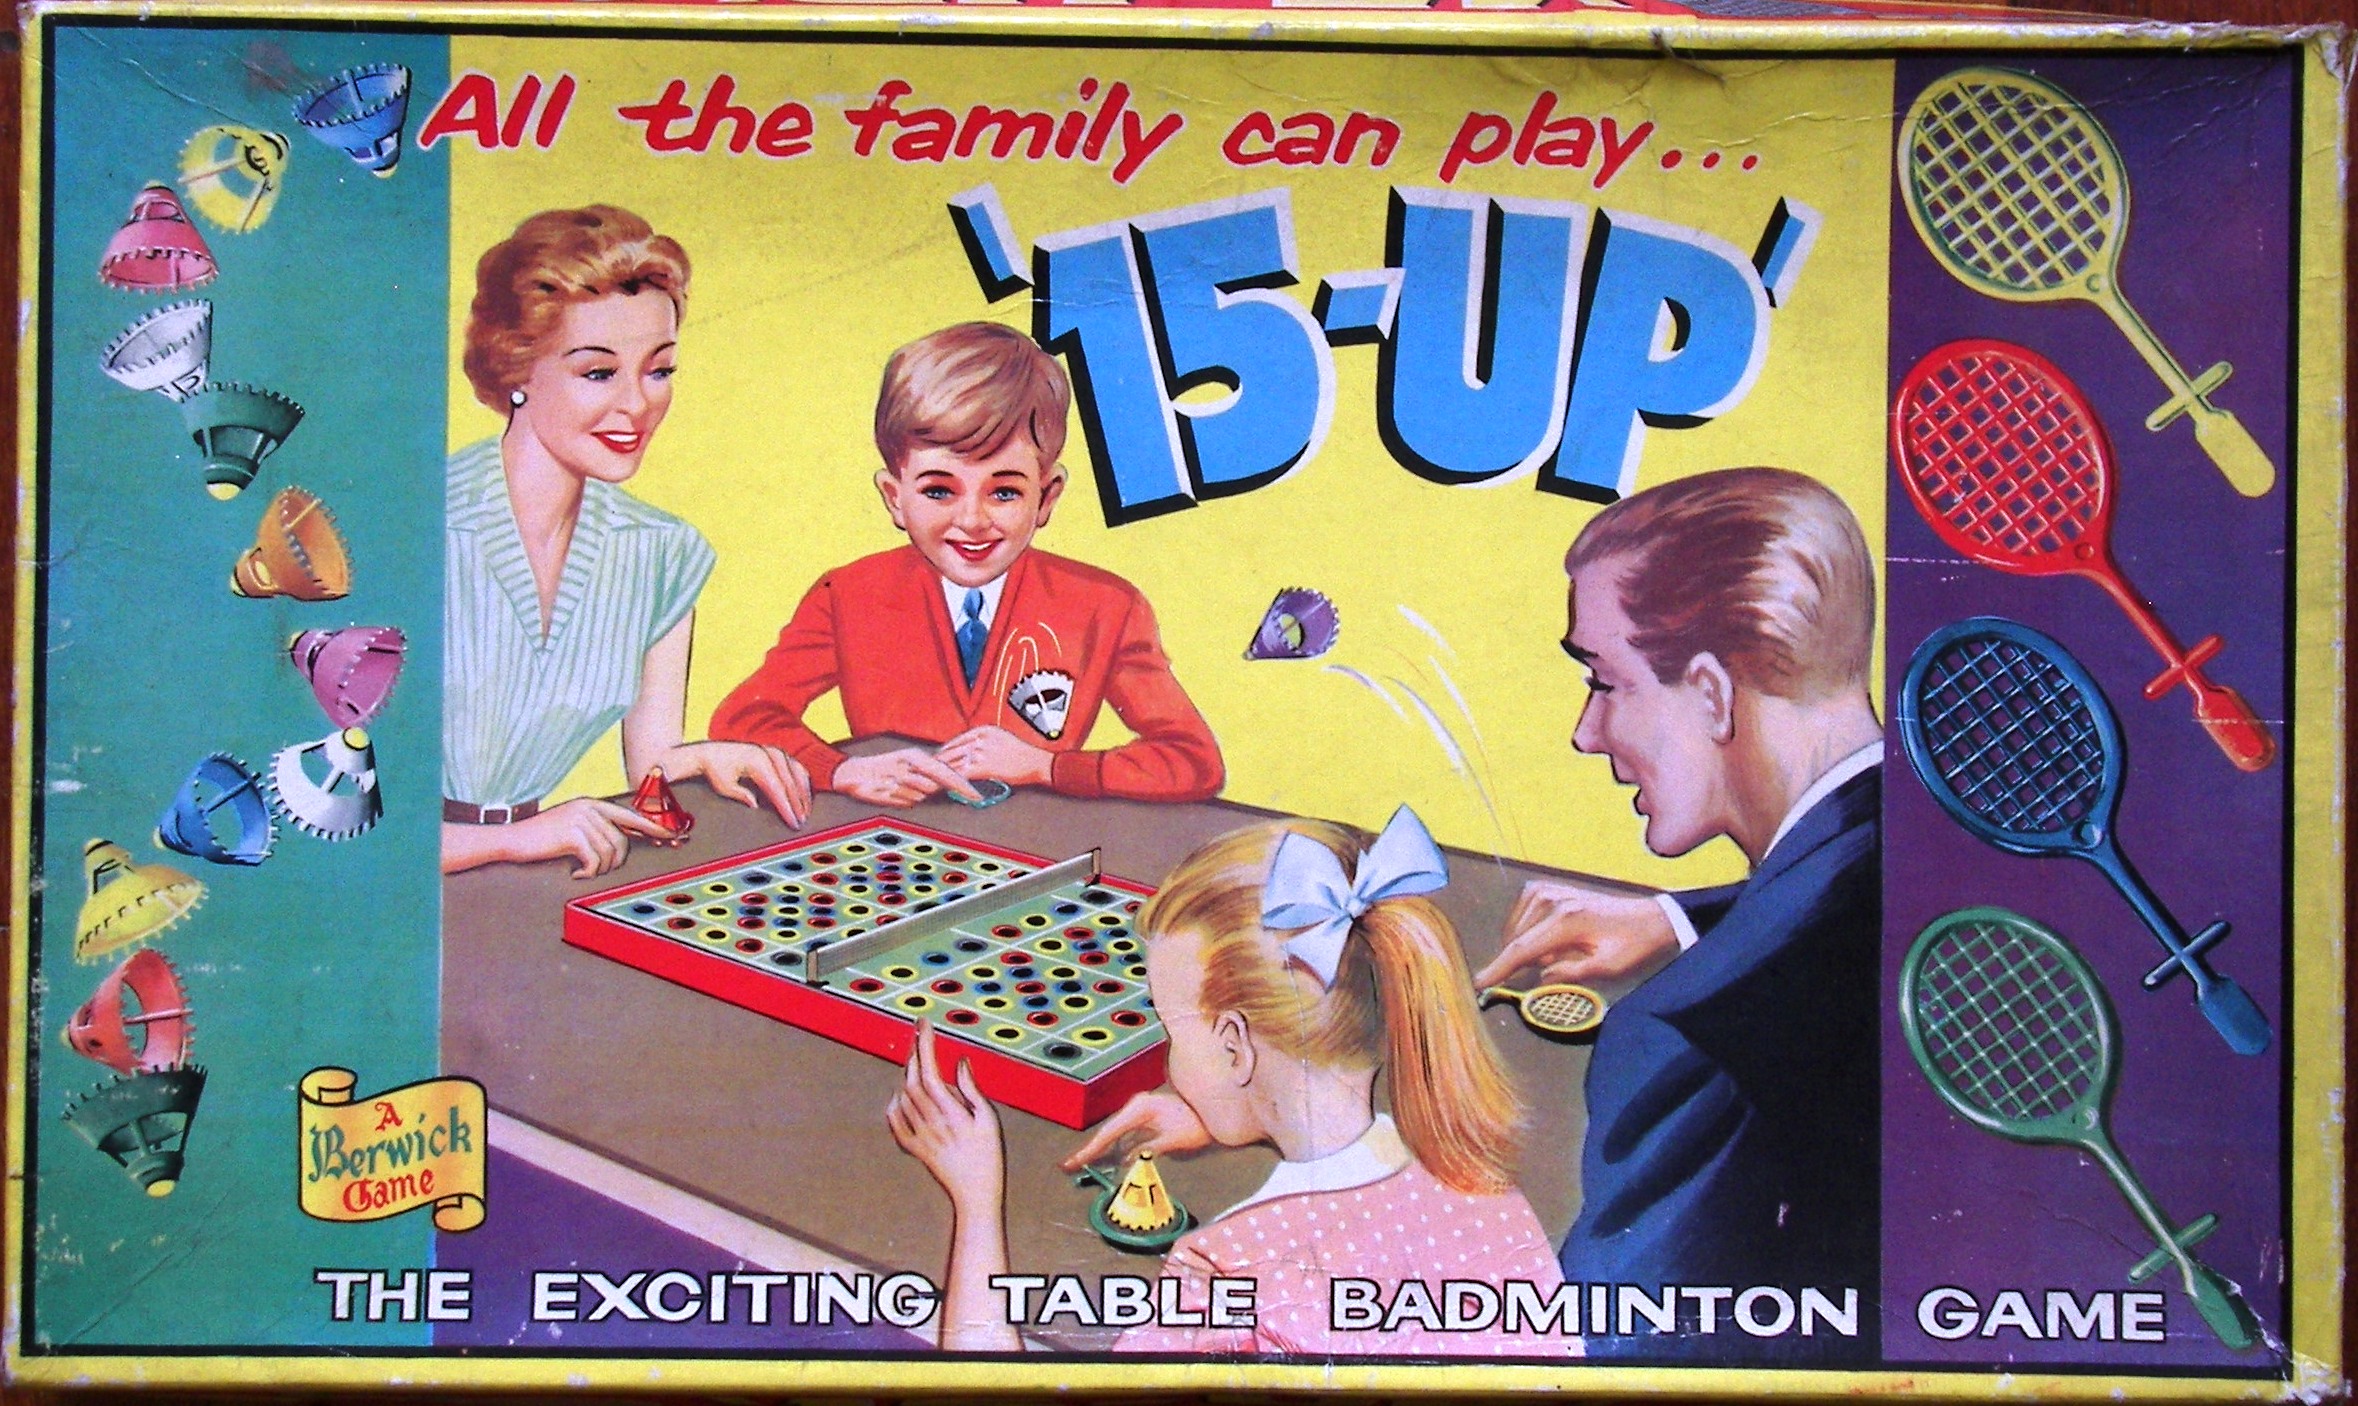 1960 15-Up Table Badminton Game by Berwick, England. - tomsk3000